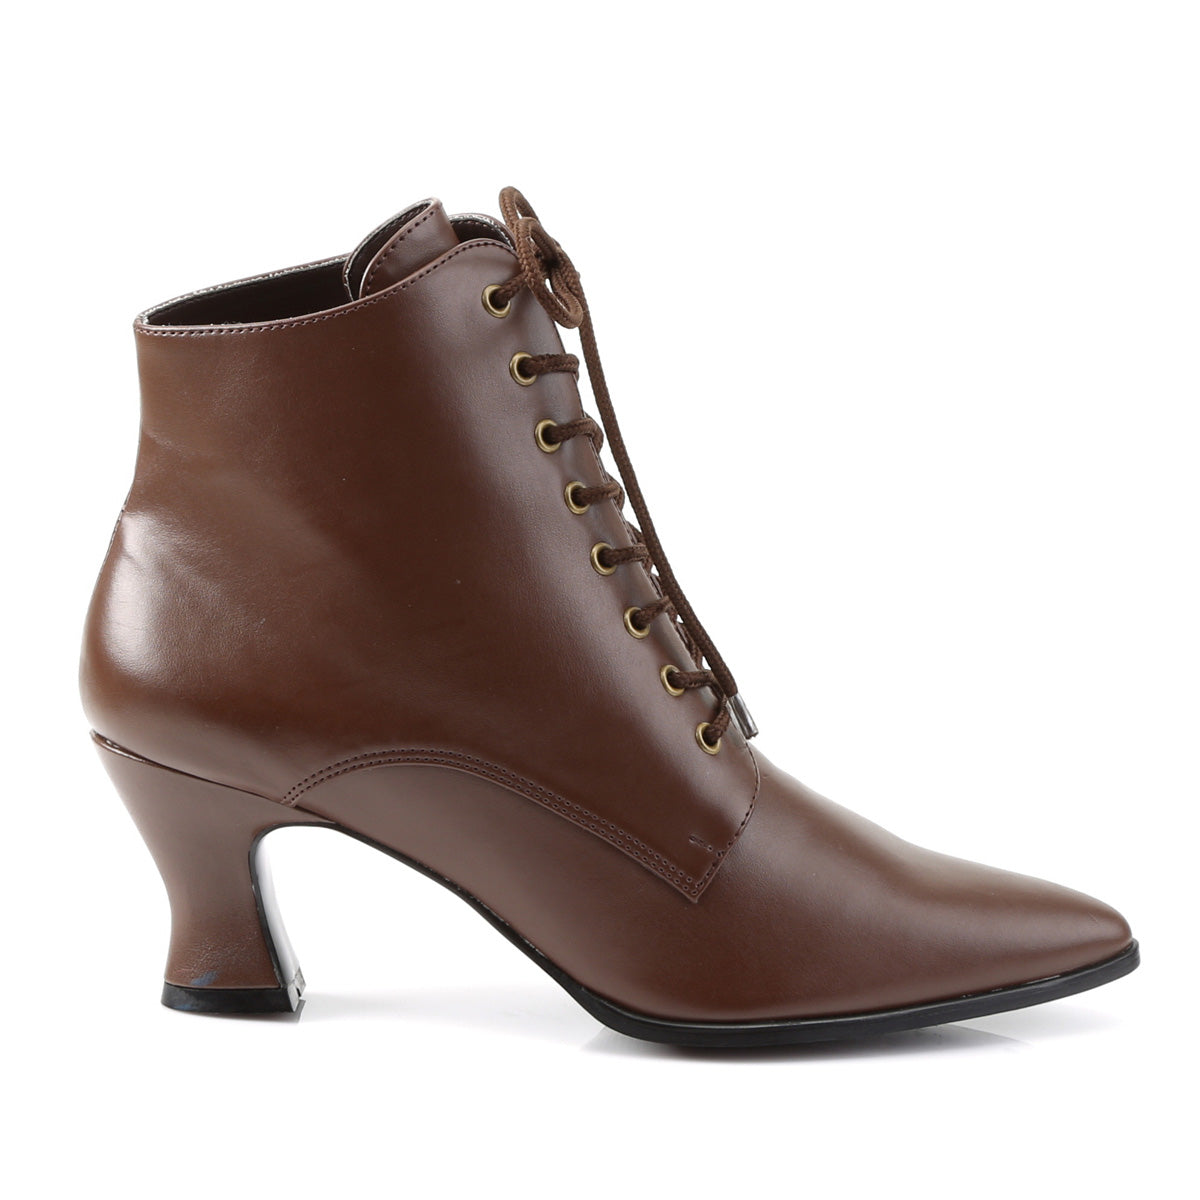 Retro Victorian Ankle Boots Brown